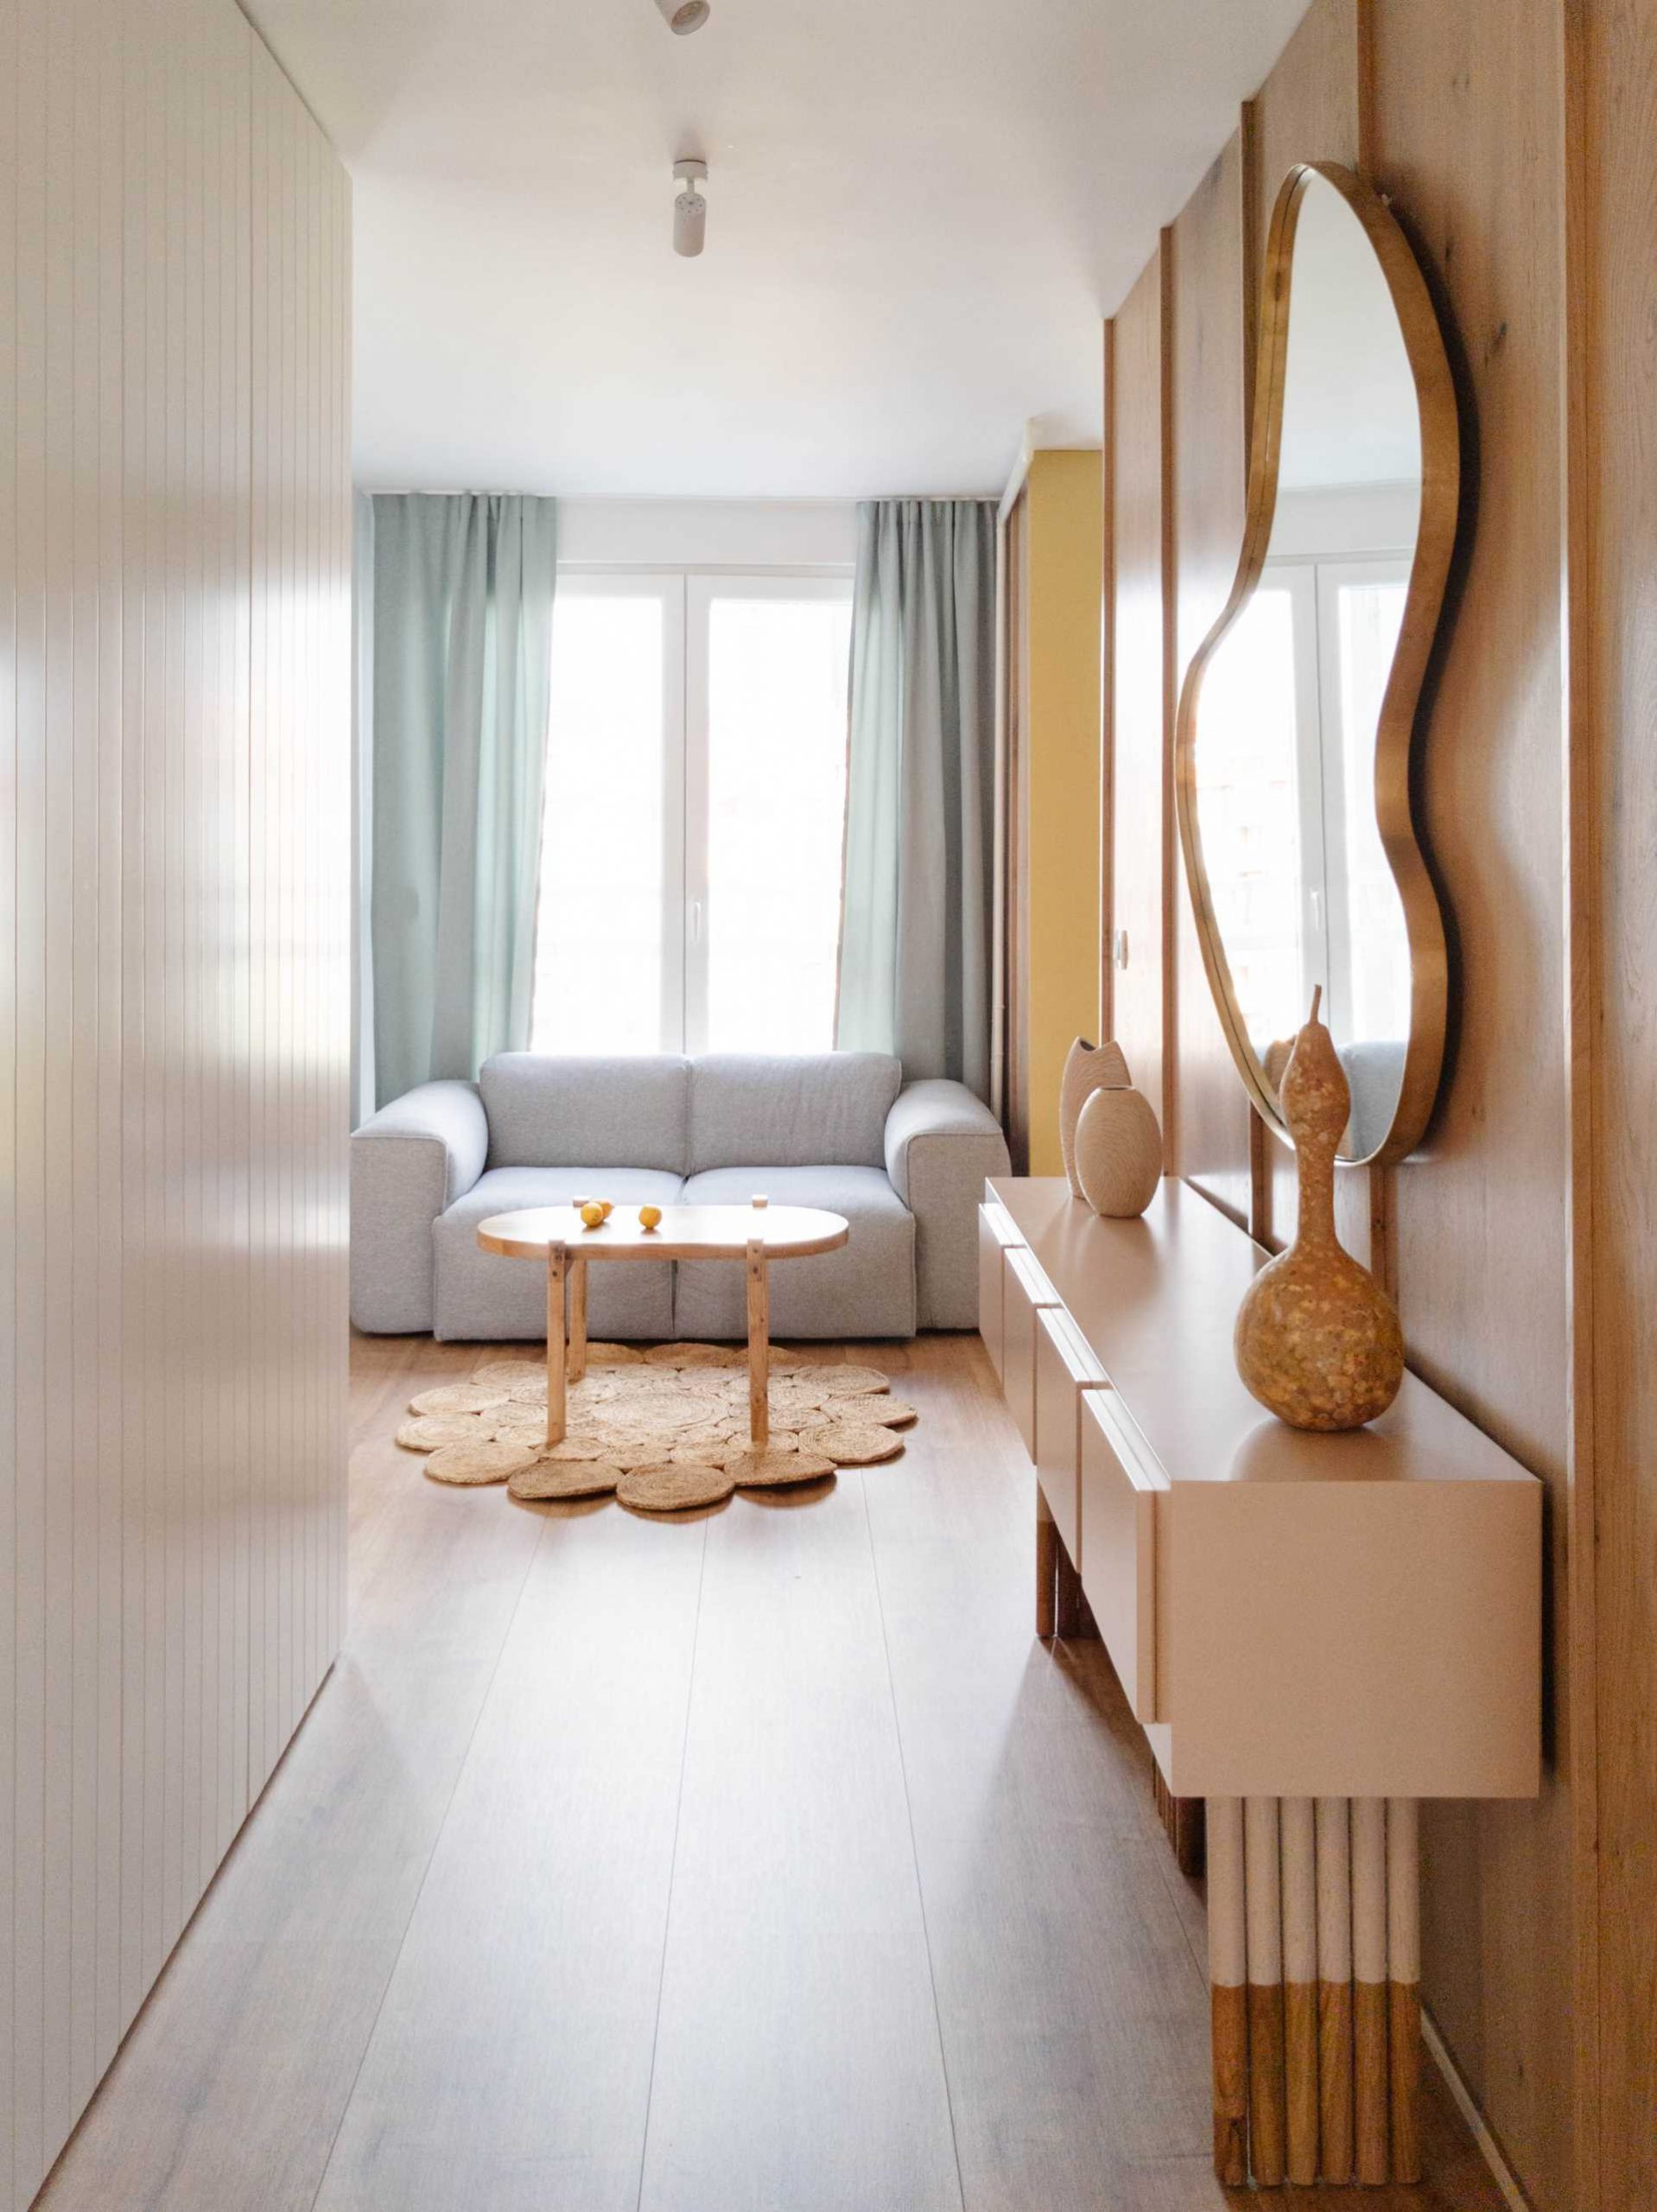 In this hallway, a wood accent wall as well as an abstract mirror and console have been added.